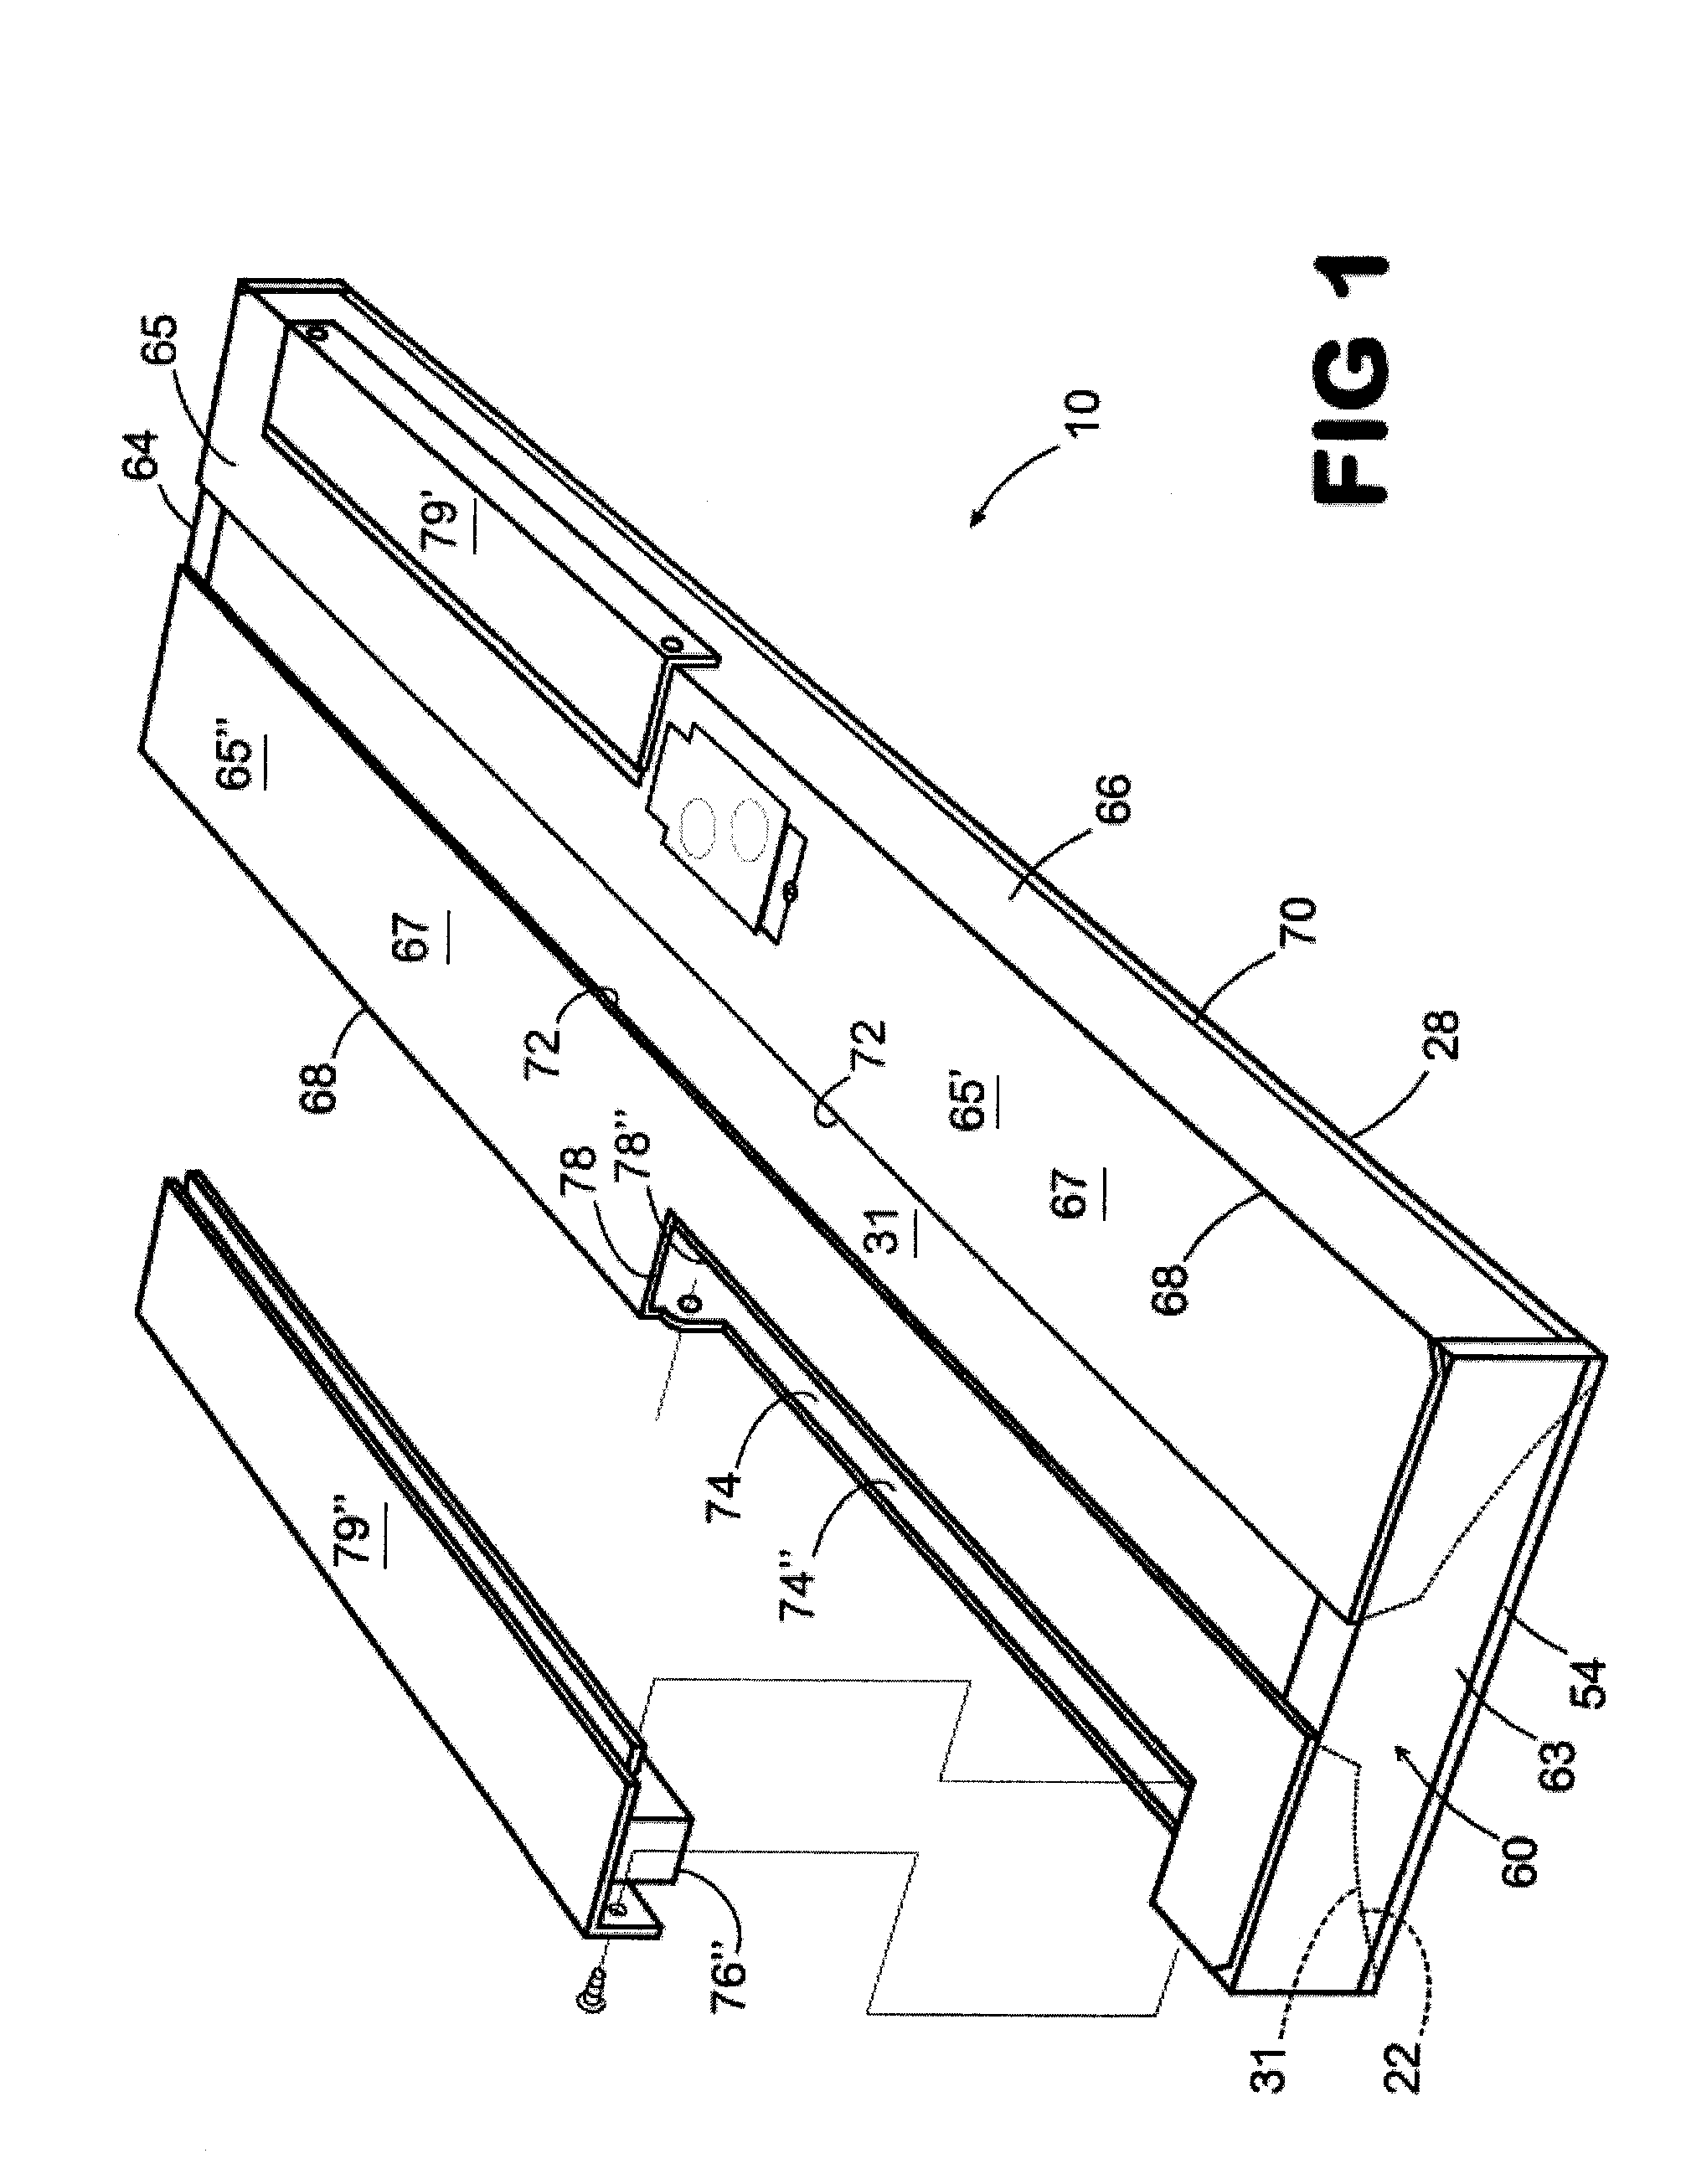 Light fixture and lens assembly for same